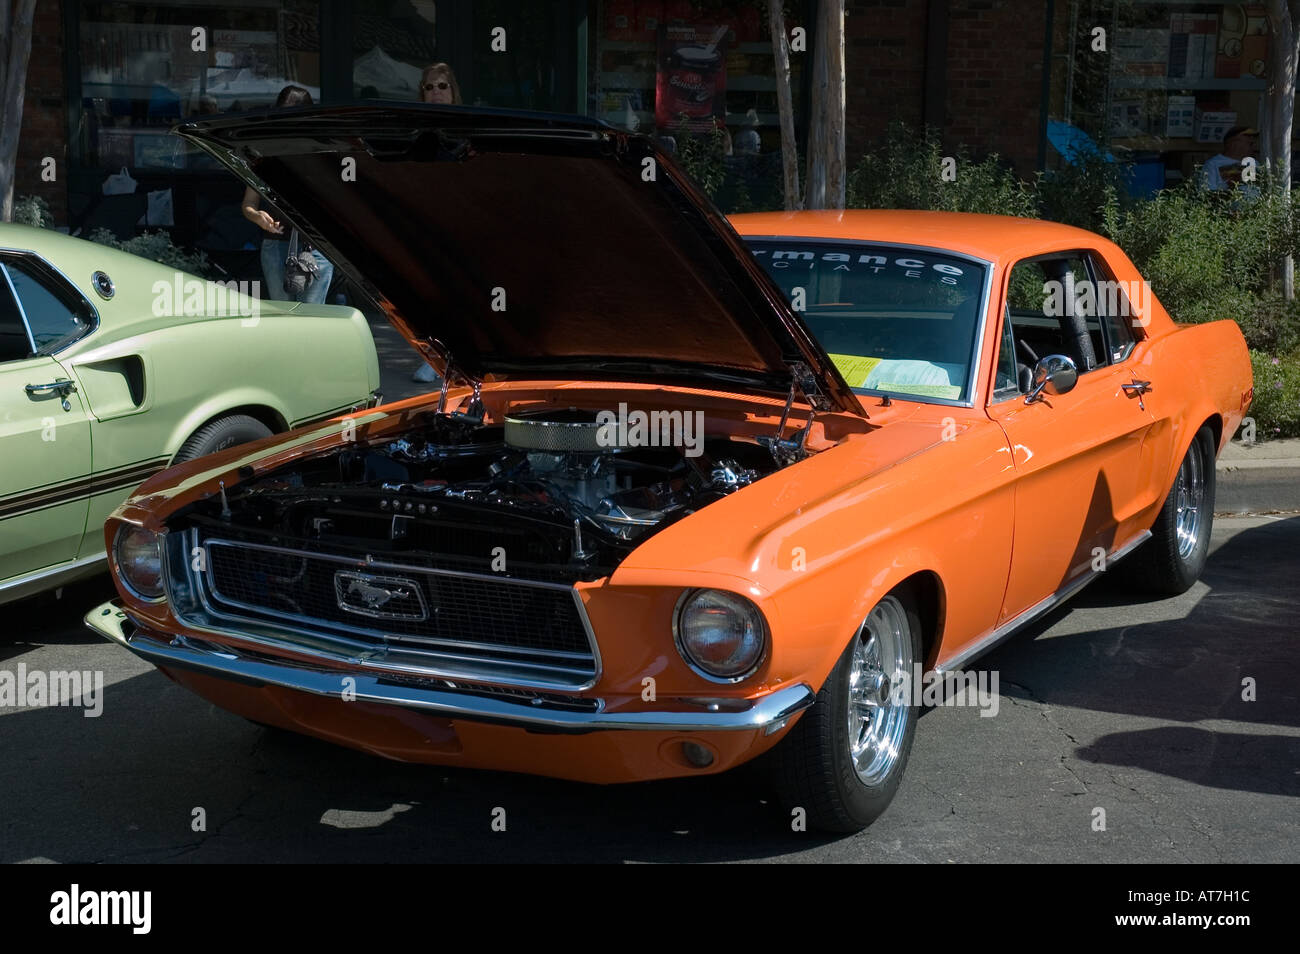 Los Angeles California car show antique customized Ford Mustang open ...